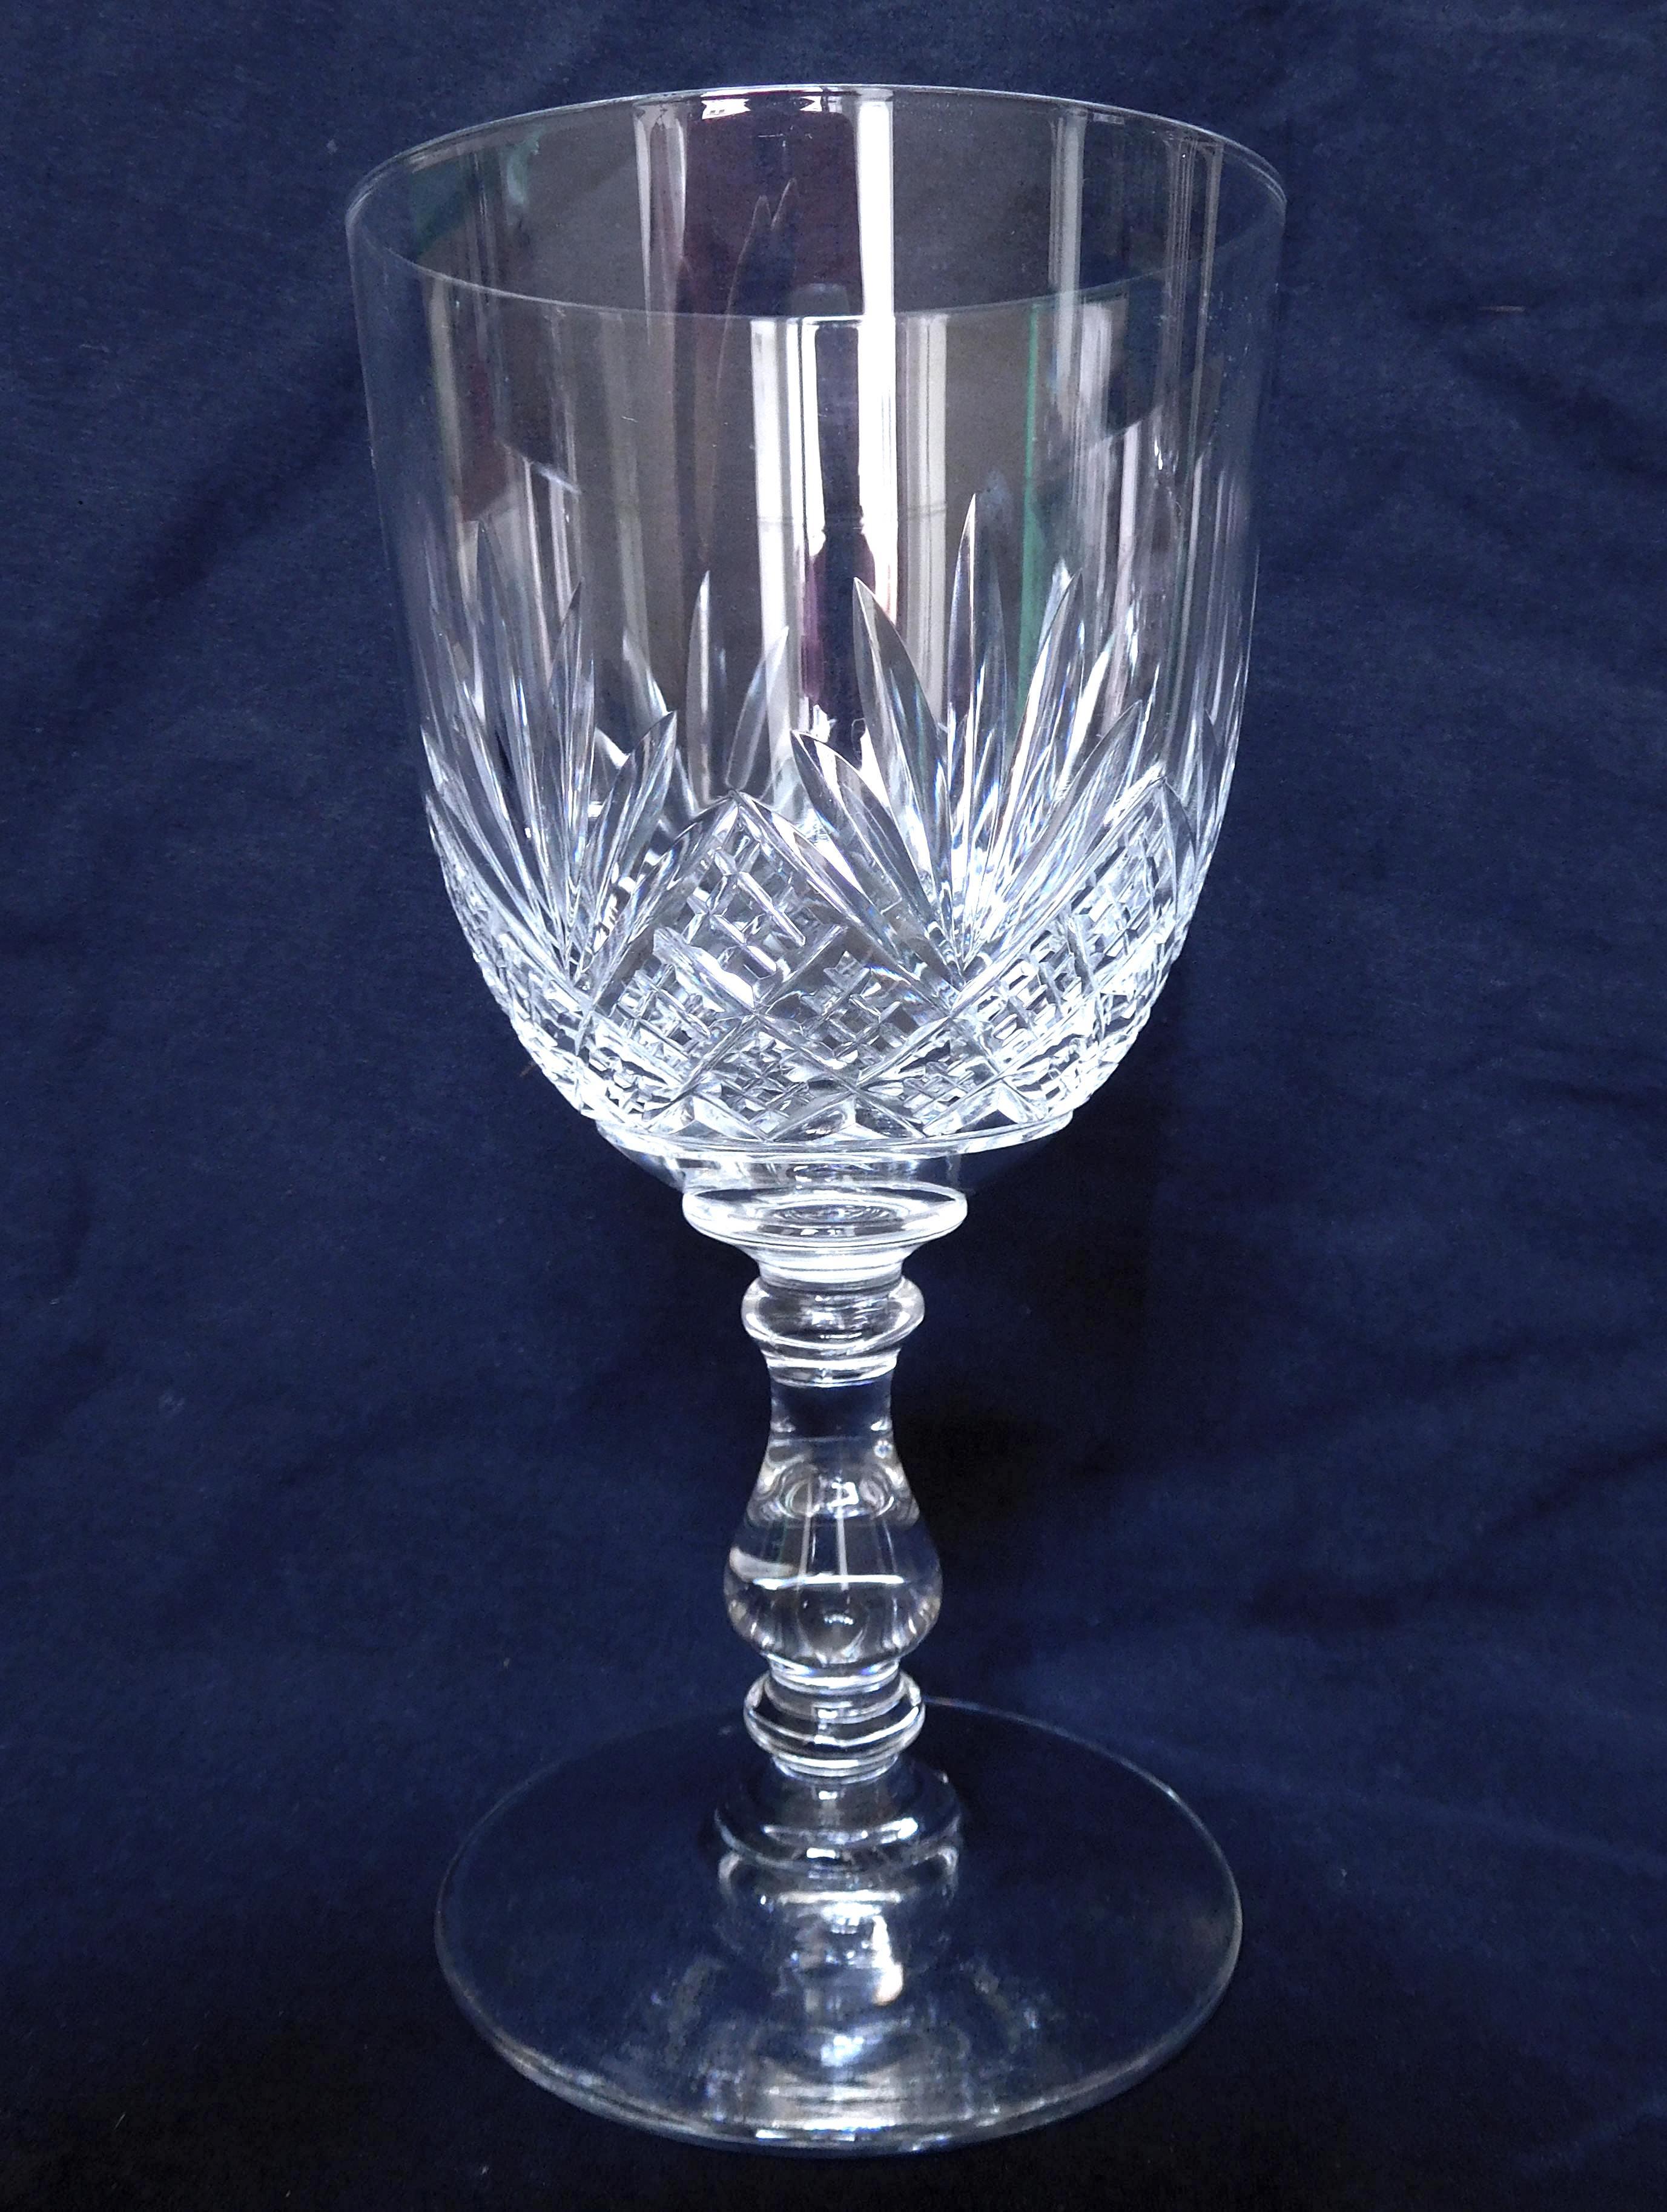 Set of 3 Baccarat crystal glasses, so-called Douai model, composed of :
- 1 water glass (15.5cm high)
- 1 wine glass (12.3cm high)
- 1 port glass (10.3cm high) or white wine glass (in late 19th century and early 20th century, people used to use this